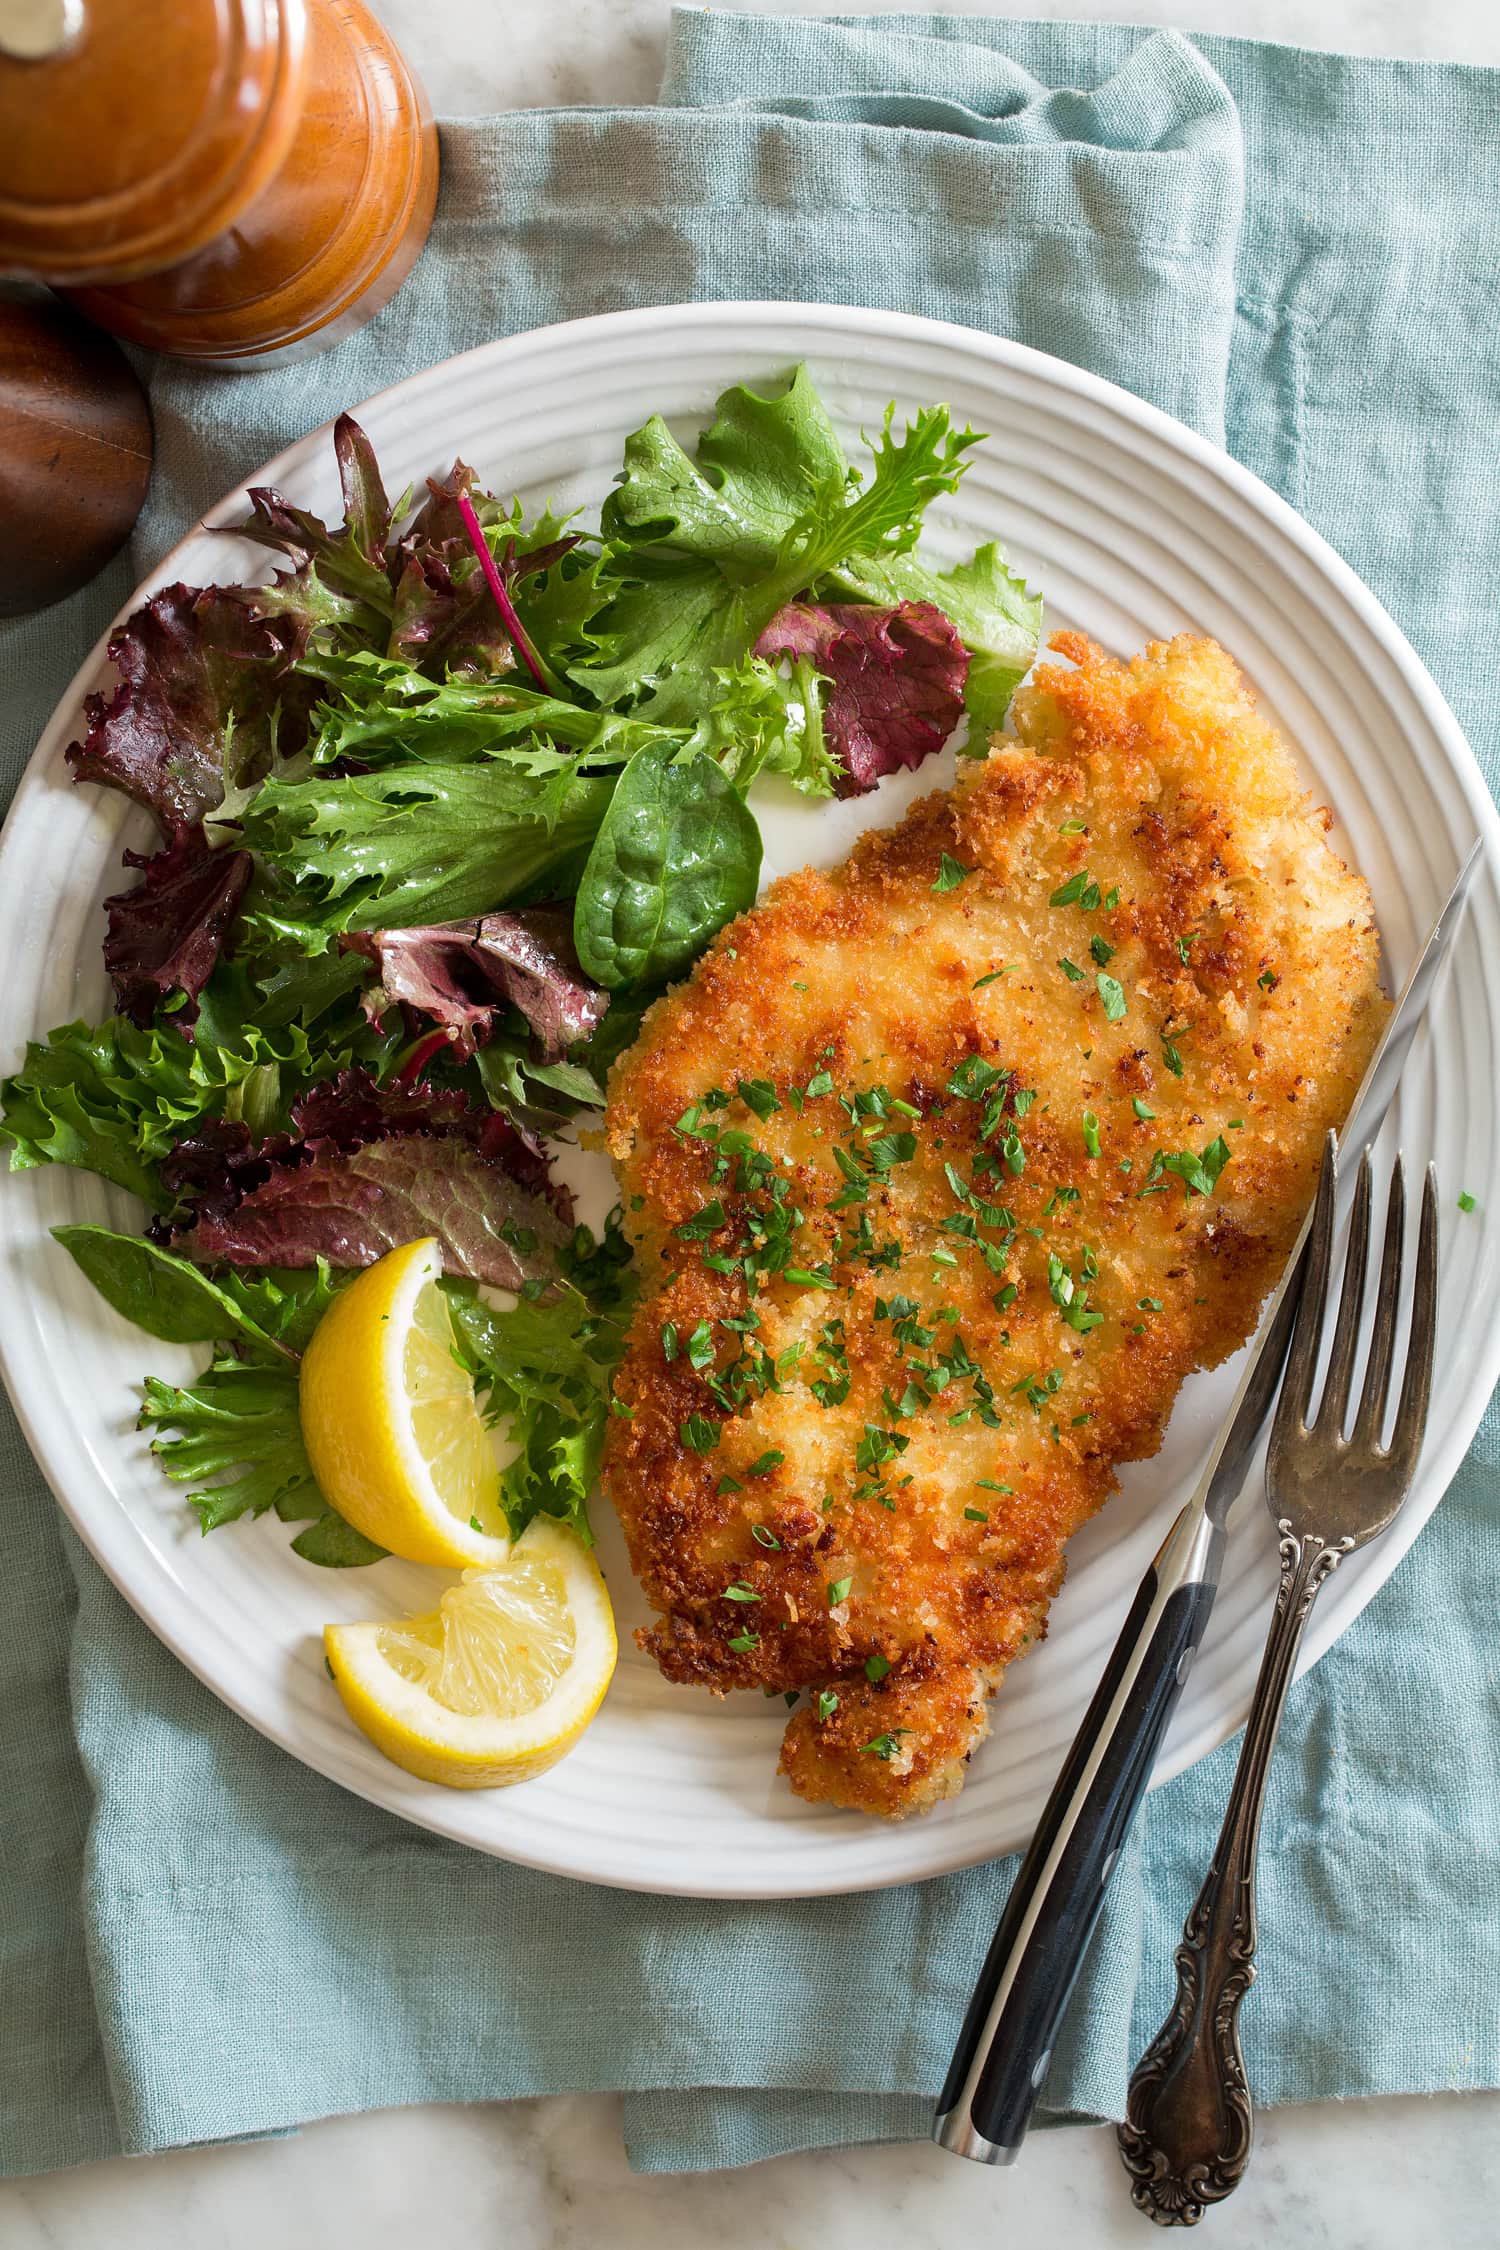 Chicken schnitzel shown served with lemons and a spring salad.